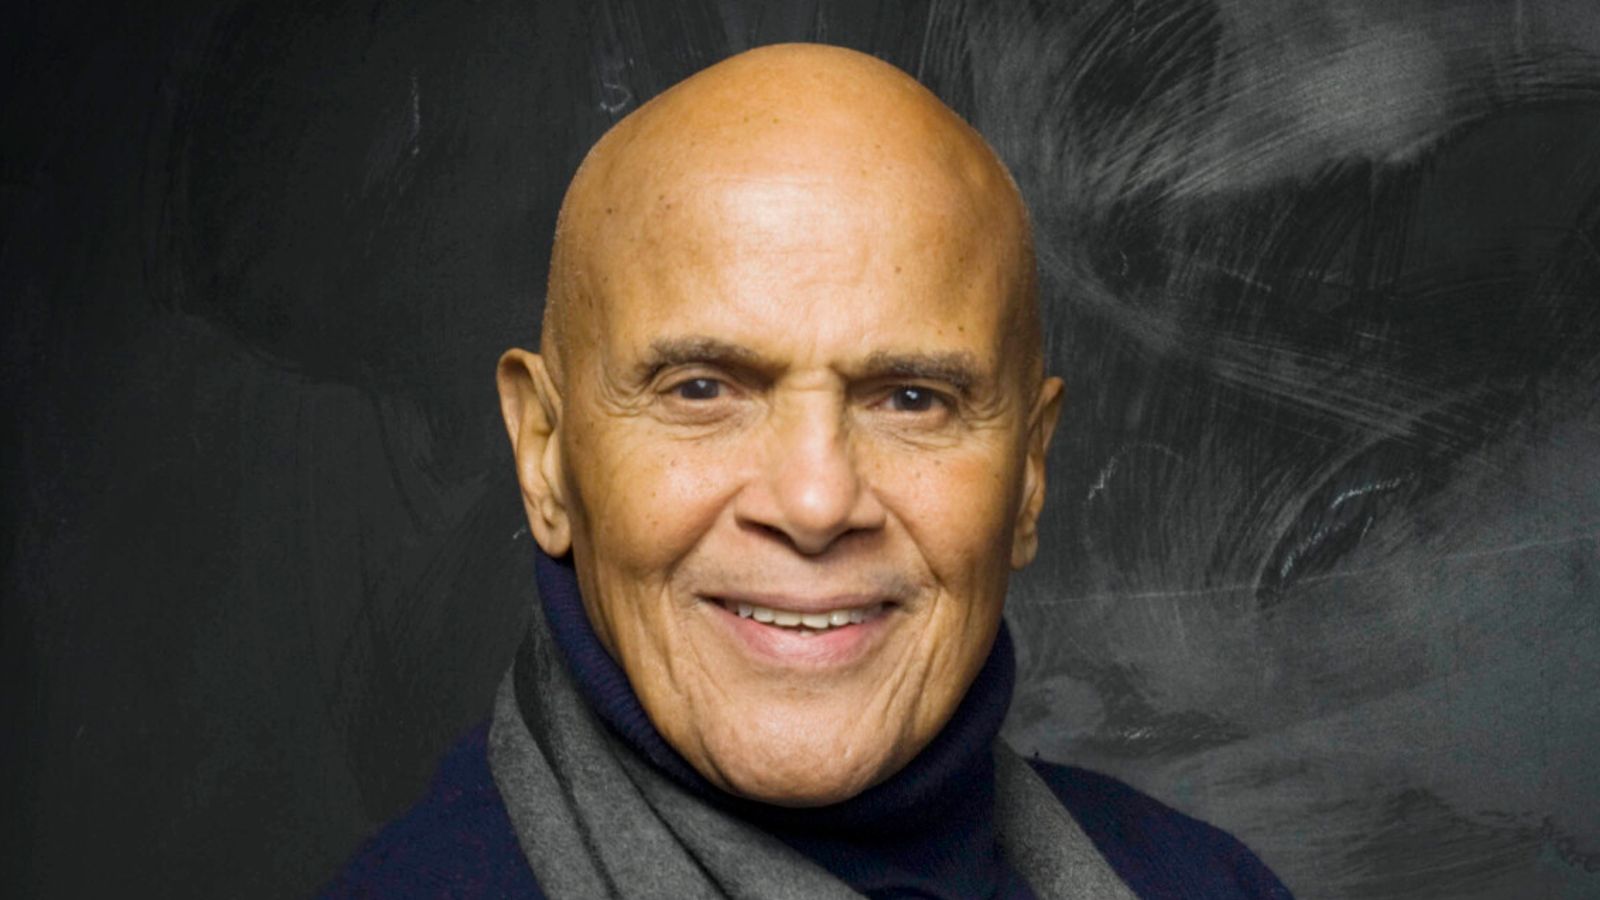 Singer, actor and civil rights activist Harry Belafonte dies at 96